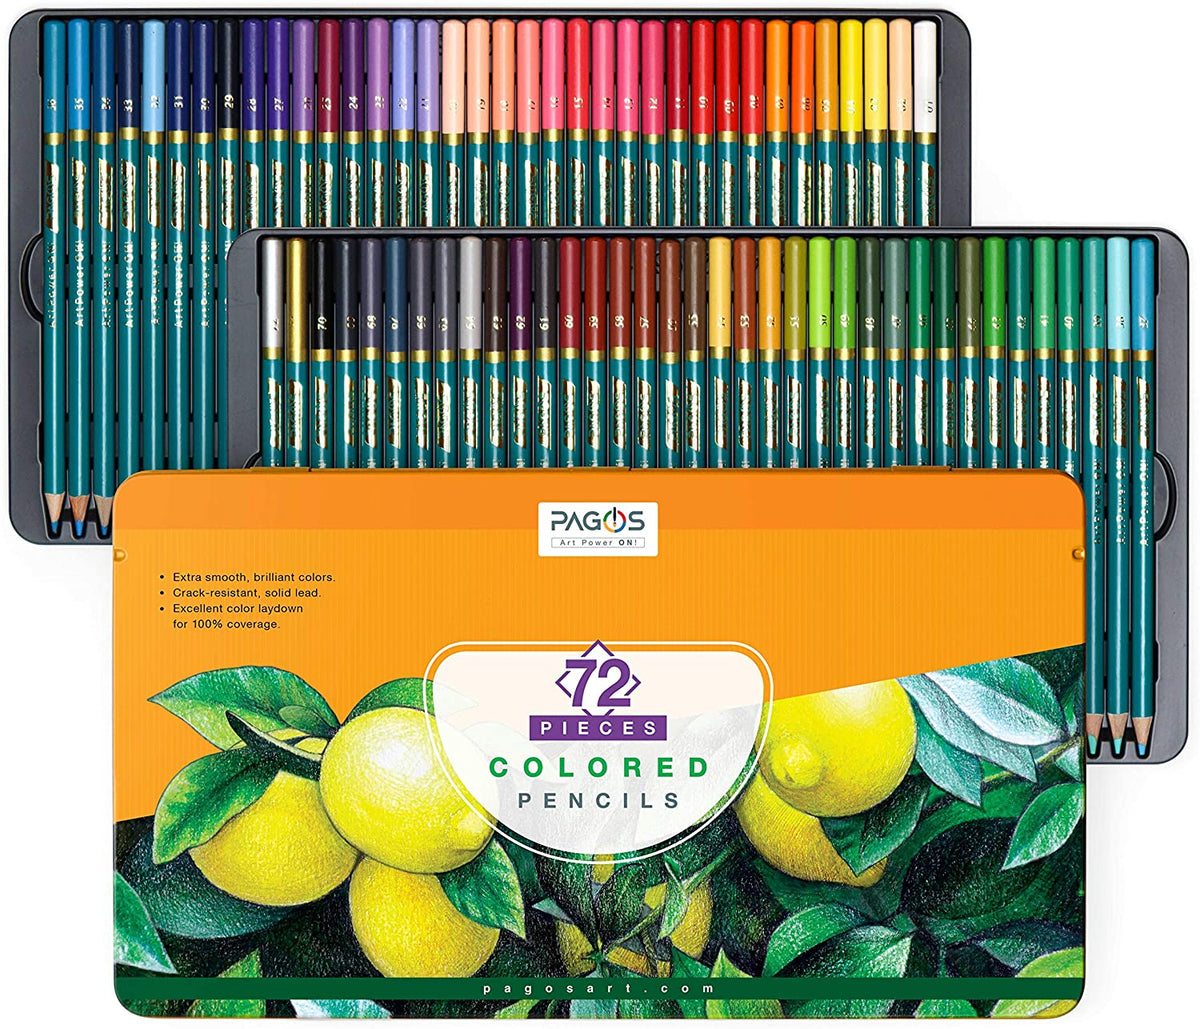  PAGOS Watercolor Pencils Set – 72 Professional Drawing Pencils  for Kids Adults Artists, Art Supplies for Coloring, Creating Beautiful  Blending Effects with Vivid Colors Brush and Water, Layering. : Arts, Crafts